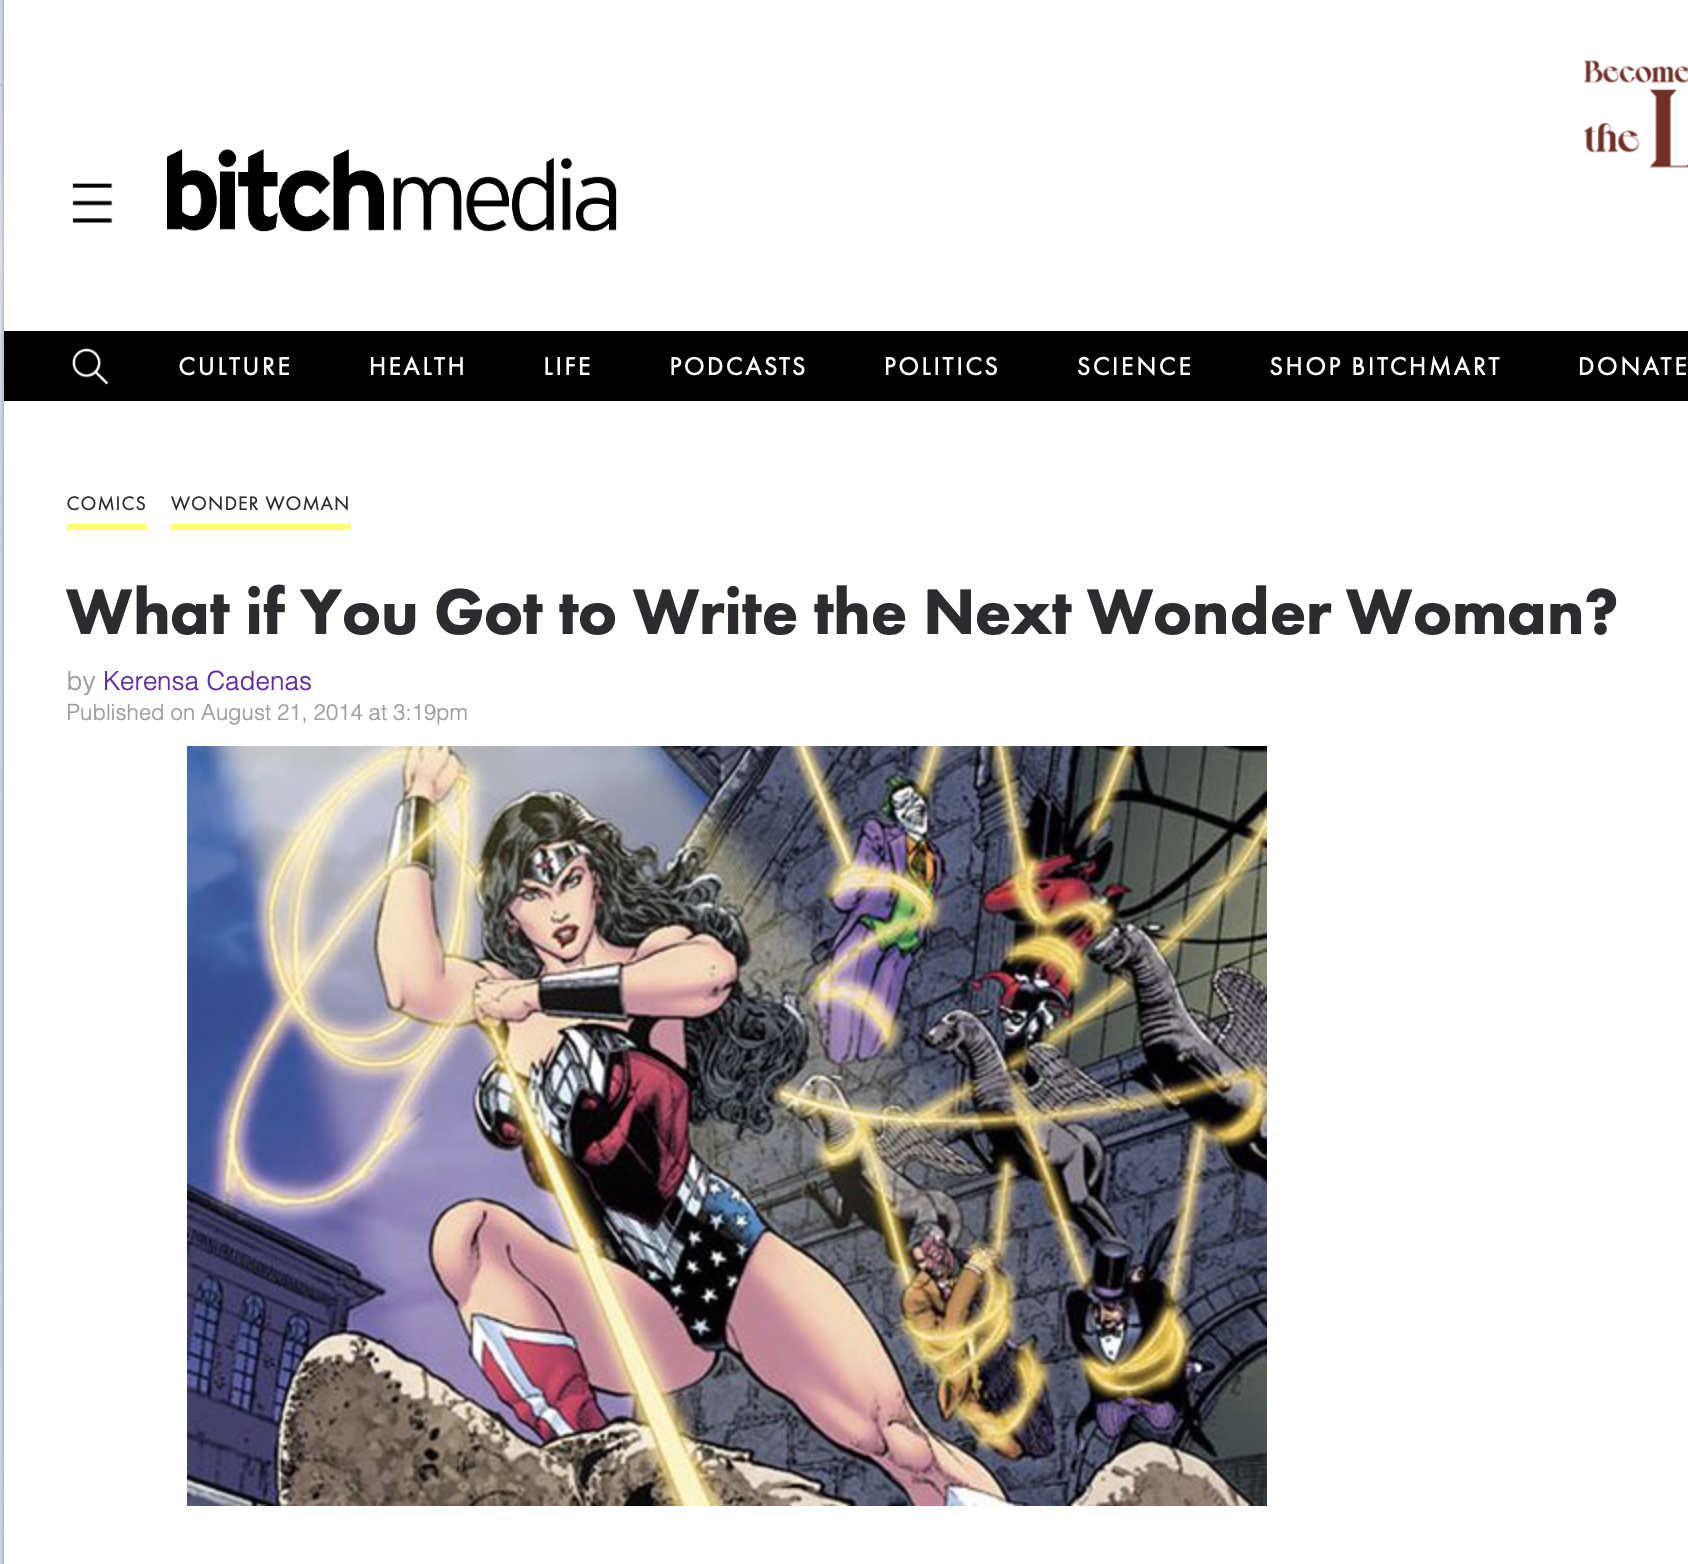 BITCH MEDIA: What if You Got to Write the Next Wonder Woman? 